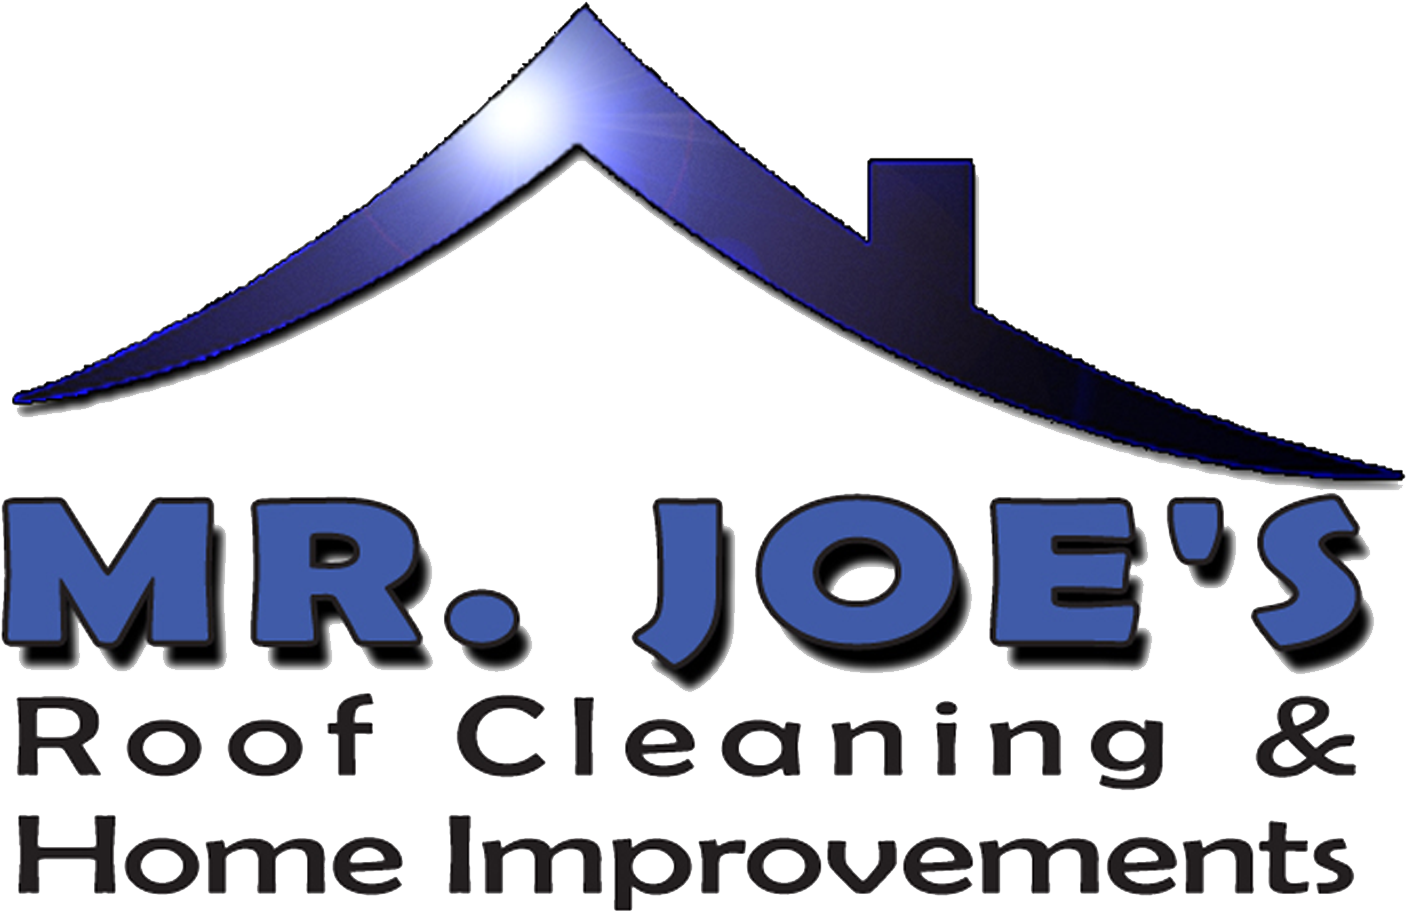 Joe's Roof Cleaning And Home Improvements - Mr. Joe's Home Improvements Llc (1500x957)